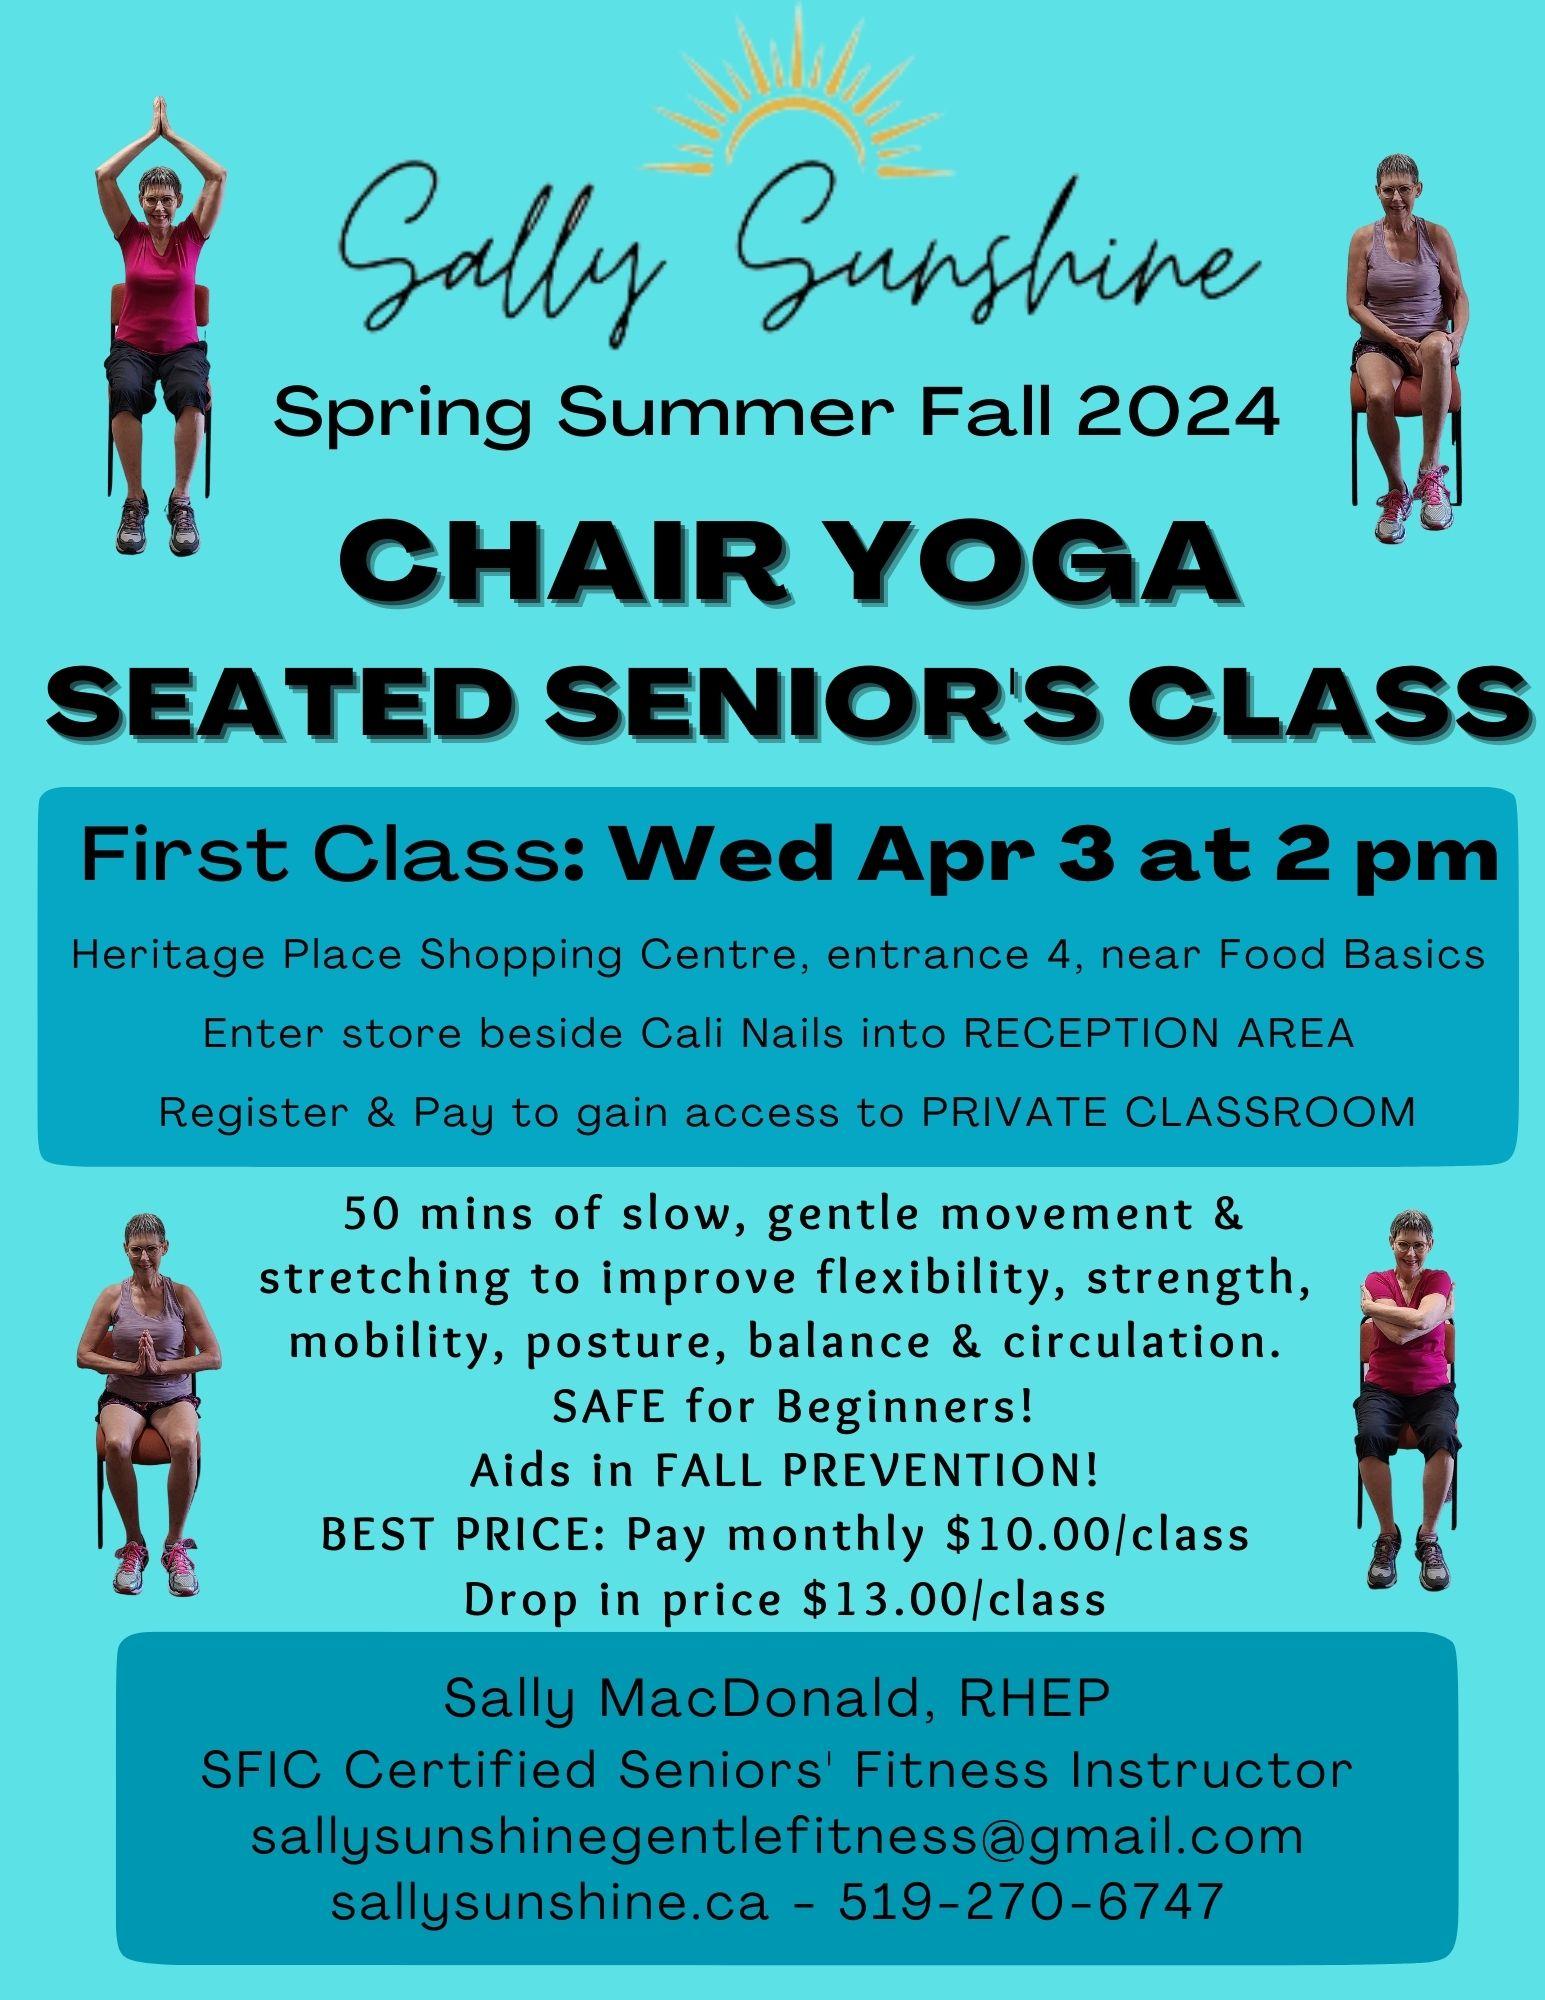 You are currently viewing Wed Heritage Place Mall Seniors’ Seated Chair Yoga